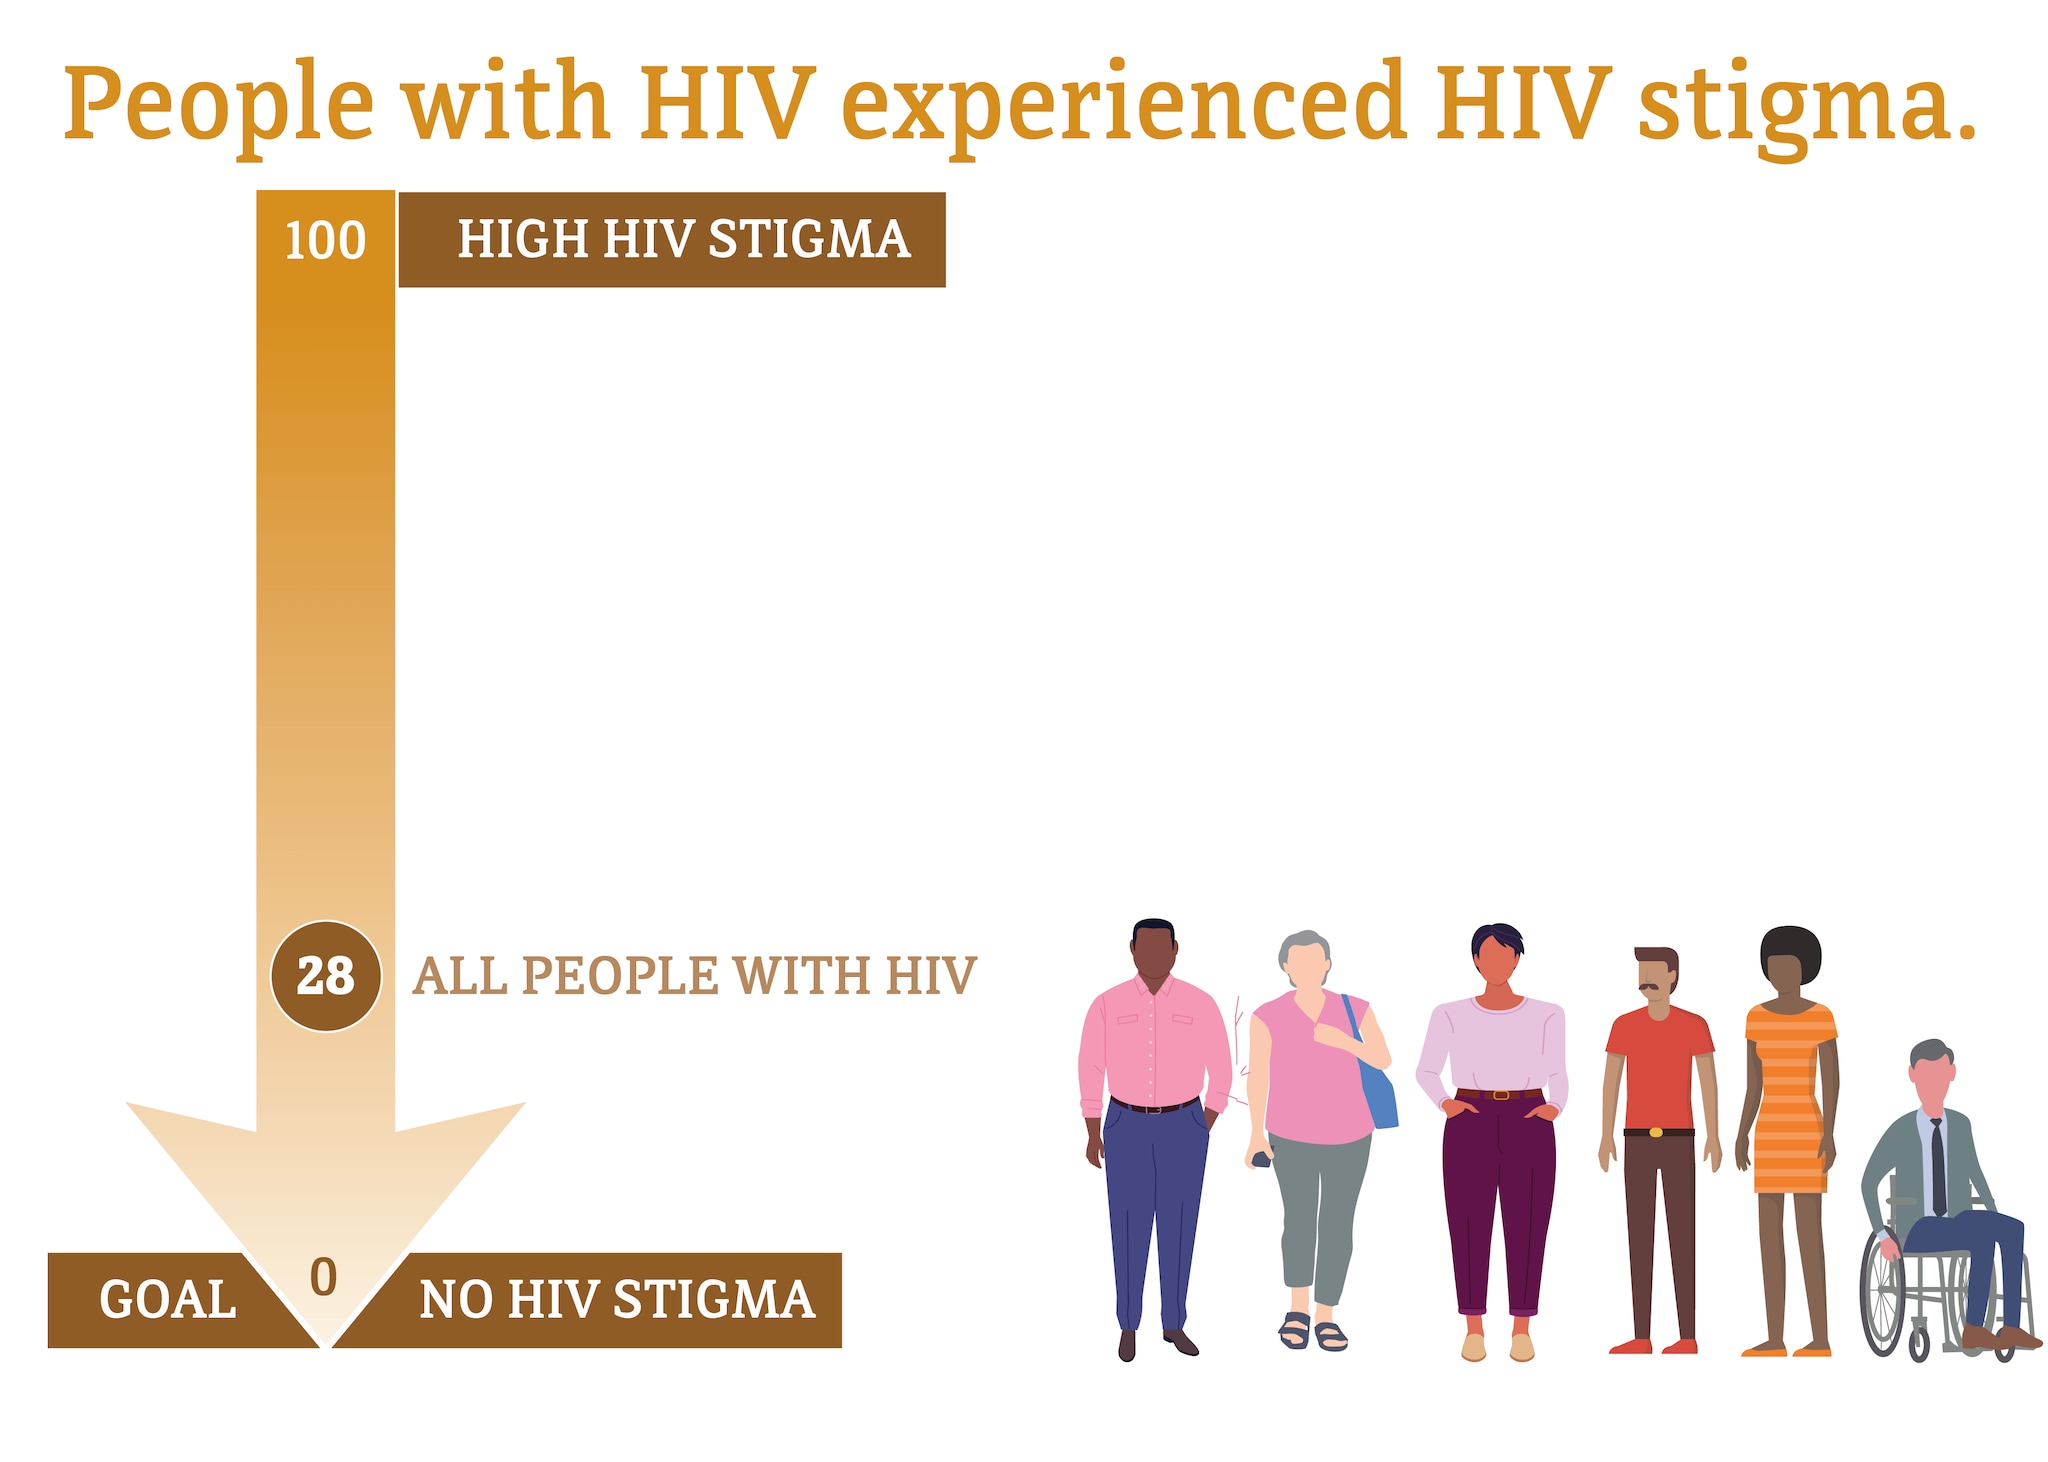 This chart shows that people with diagnosed HIV experienced HIV stigma.